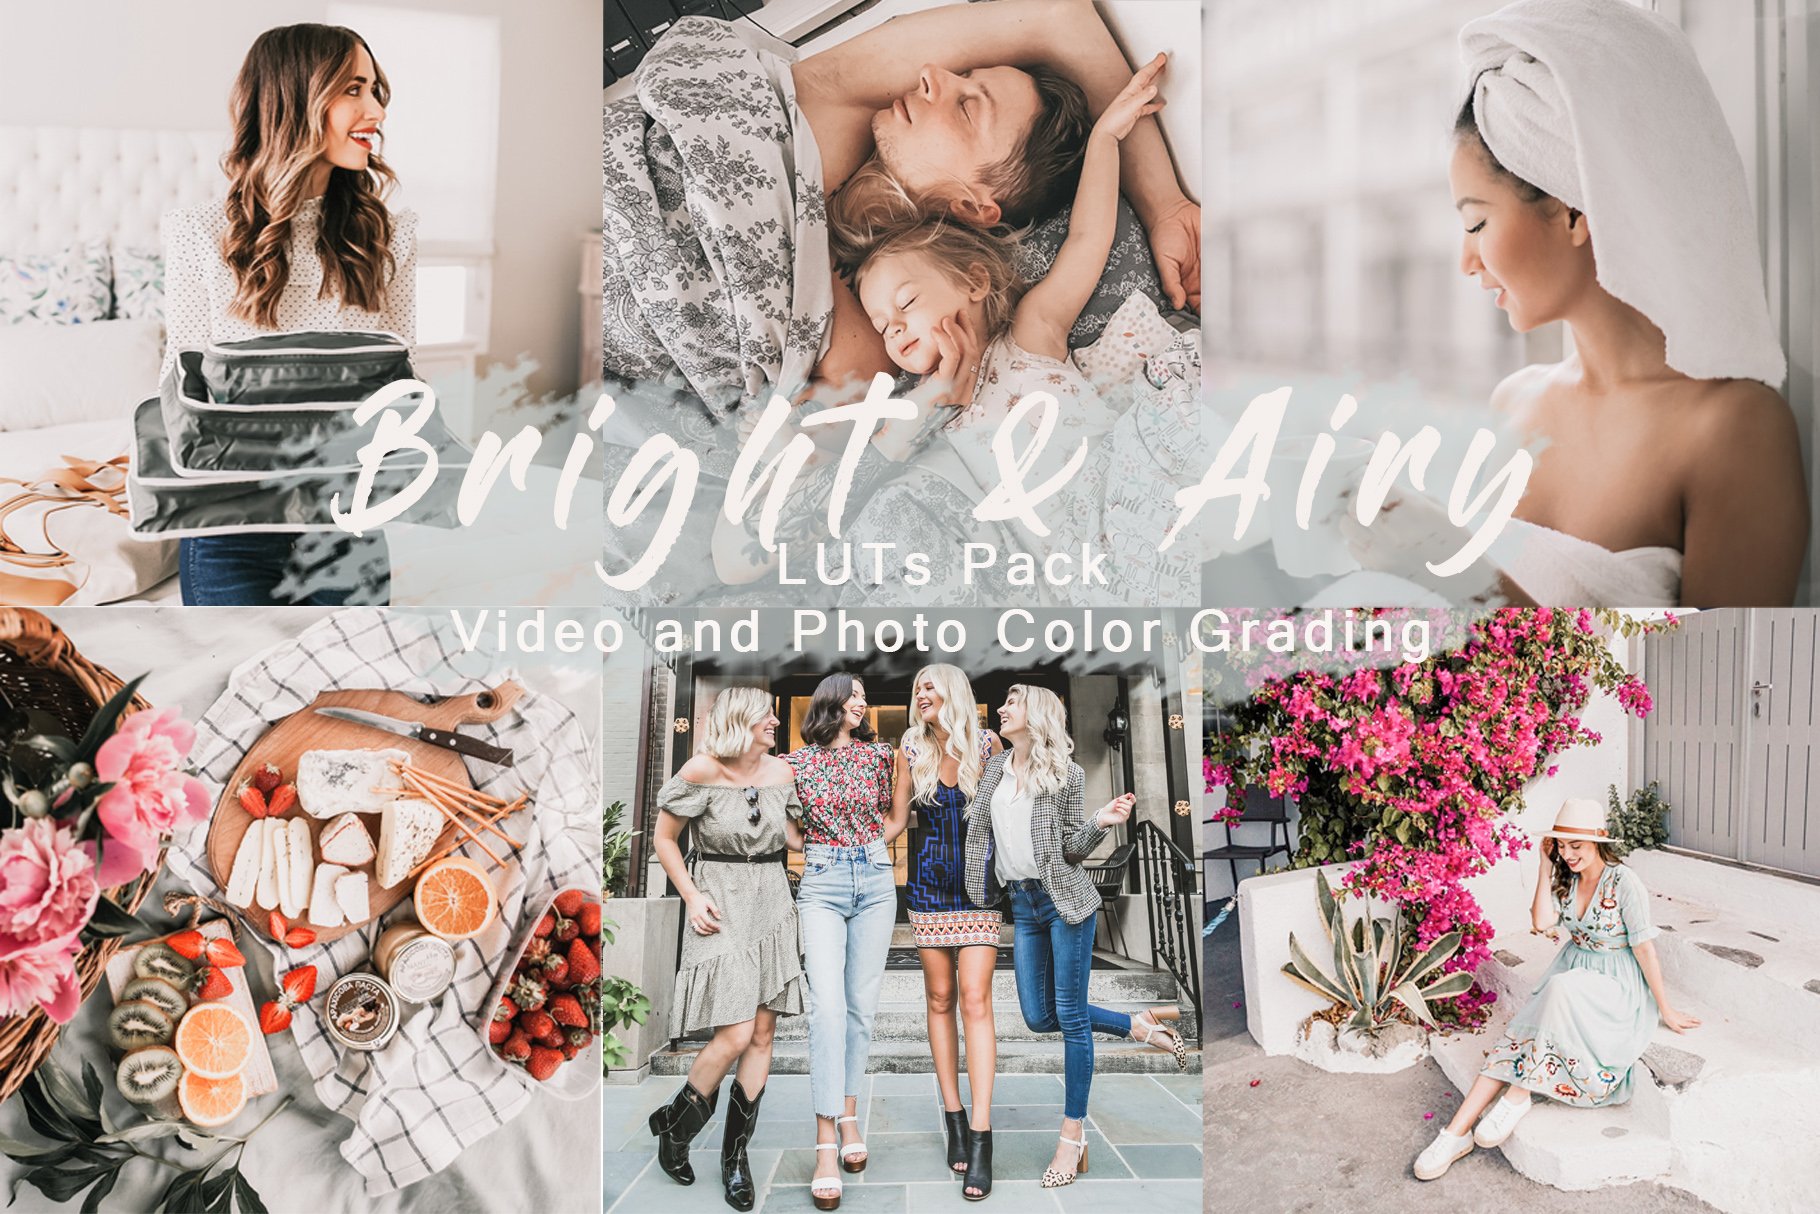 Bright & Airy | LUTs Pack for Videocover image.